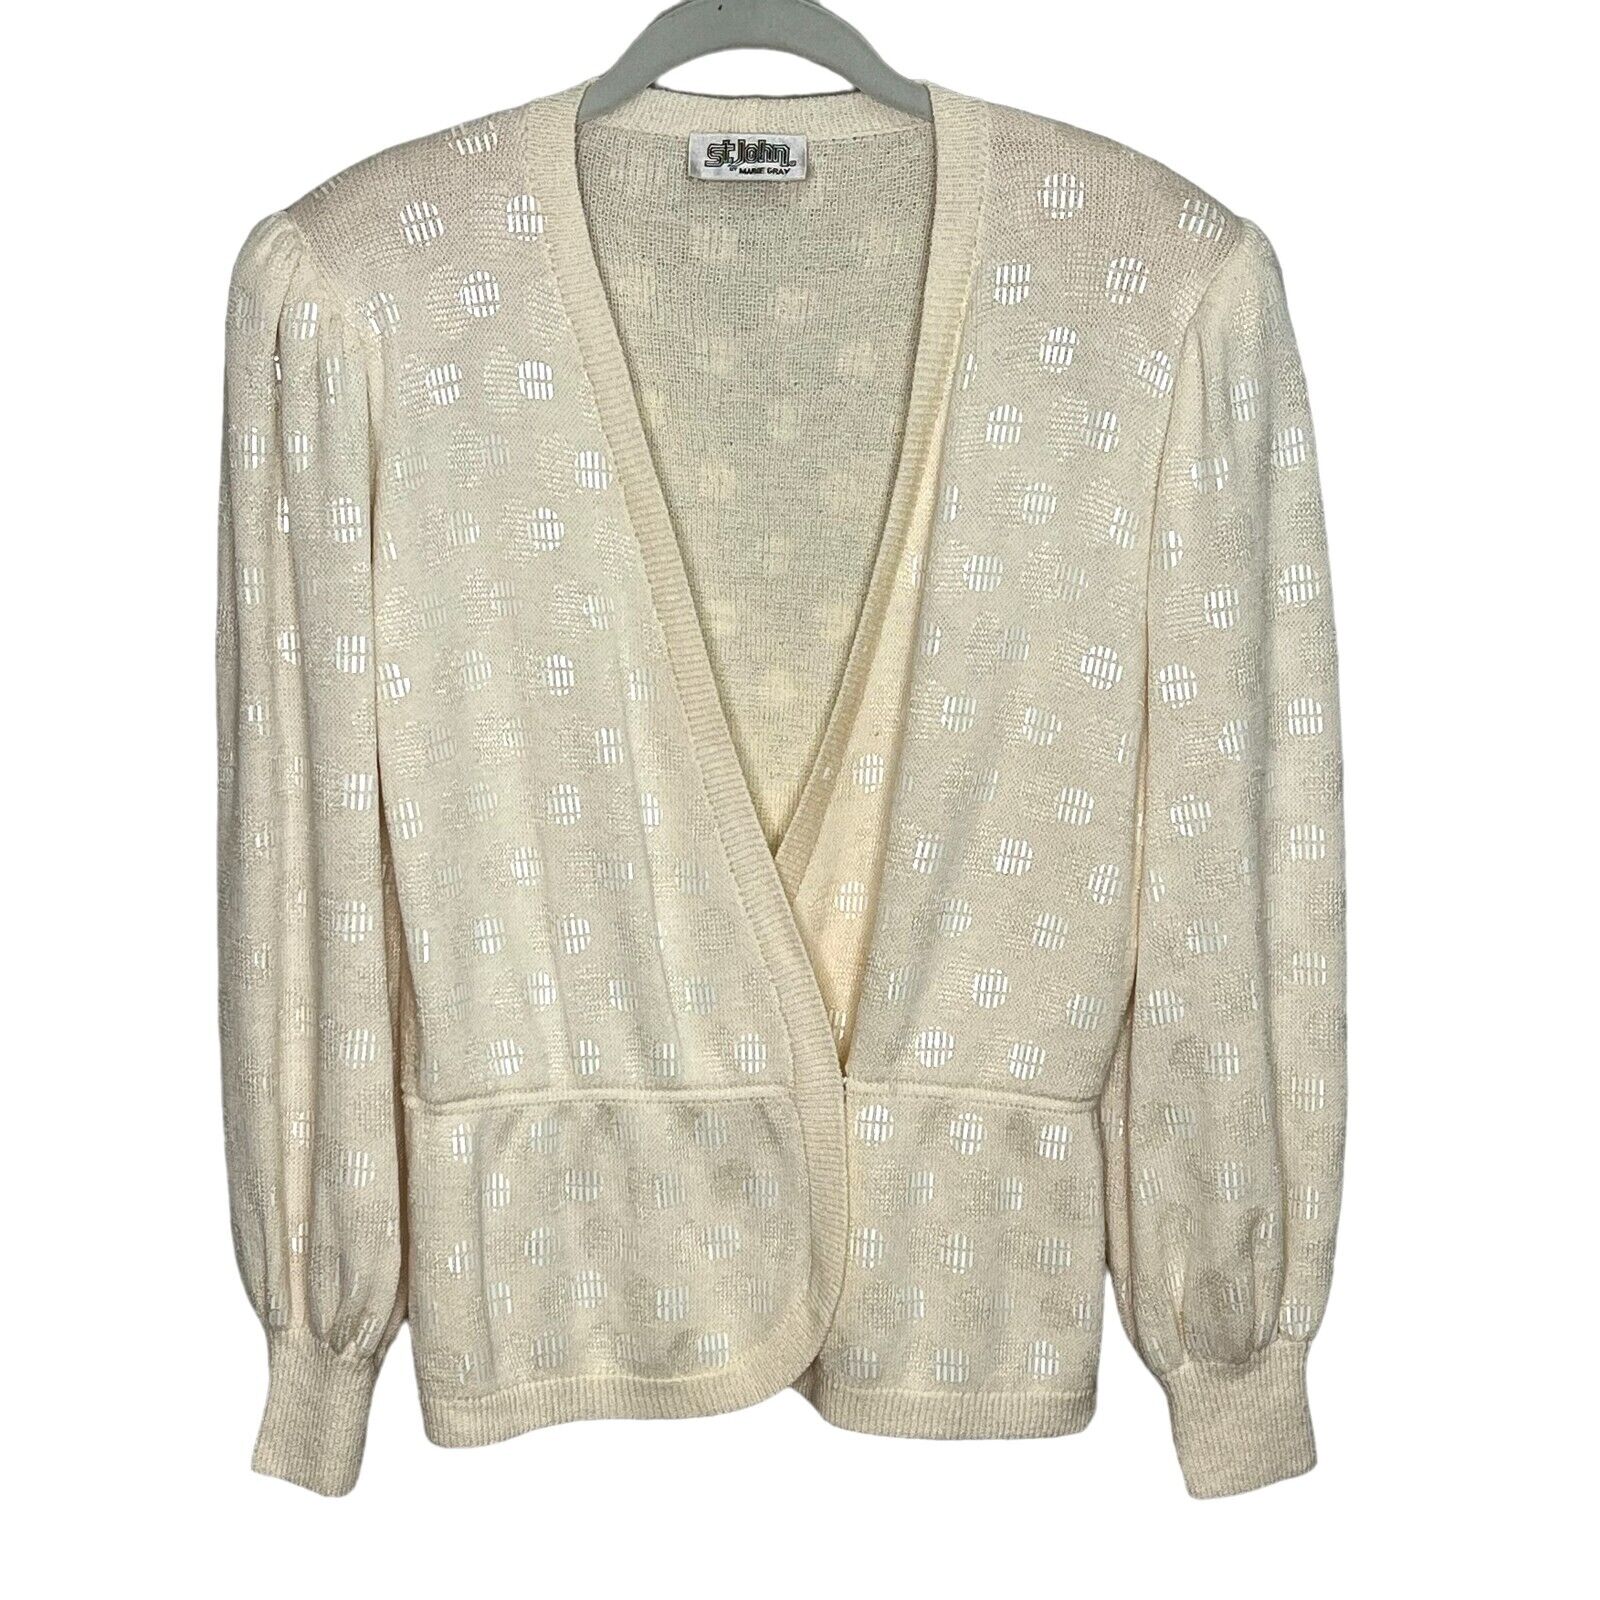 St. John Vintage 80s Ivory Cream Cardigan with Accents Size 8